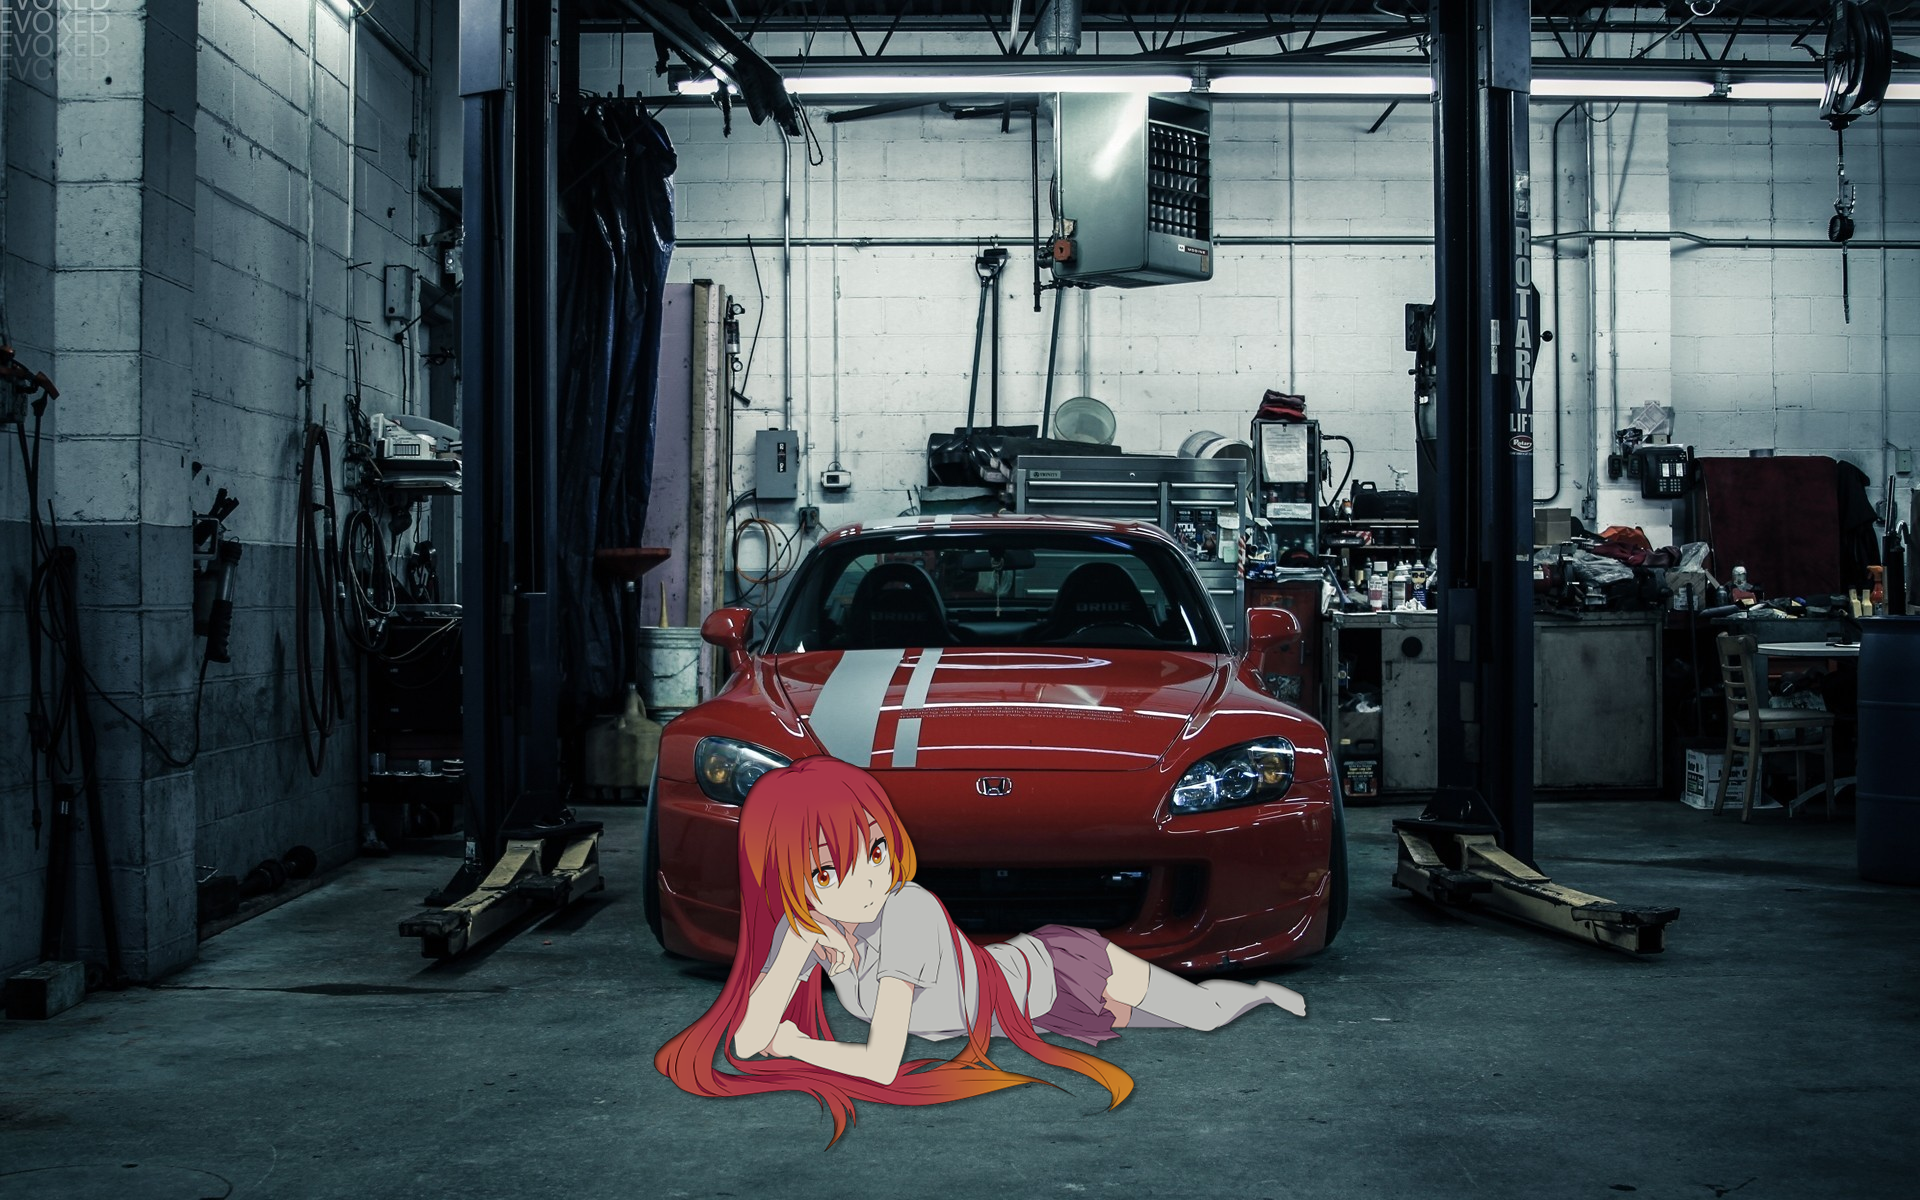 S2k JDM Anime Girls Picture In Picture 1920x1200